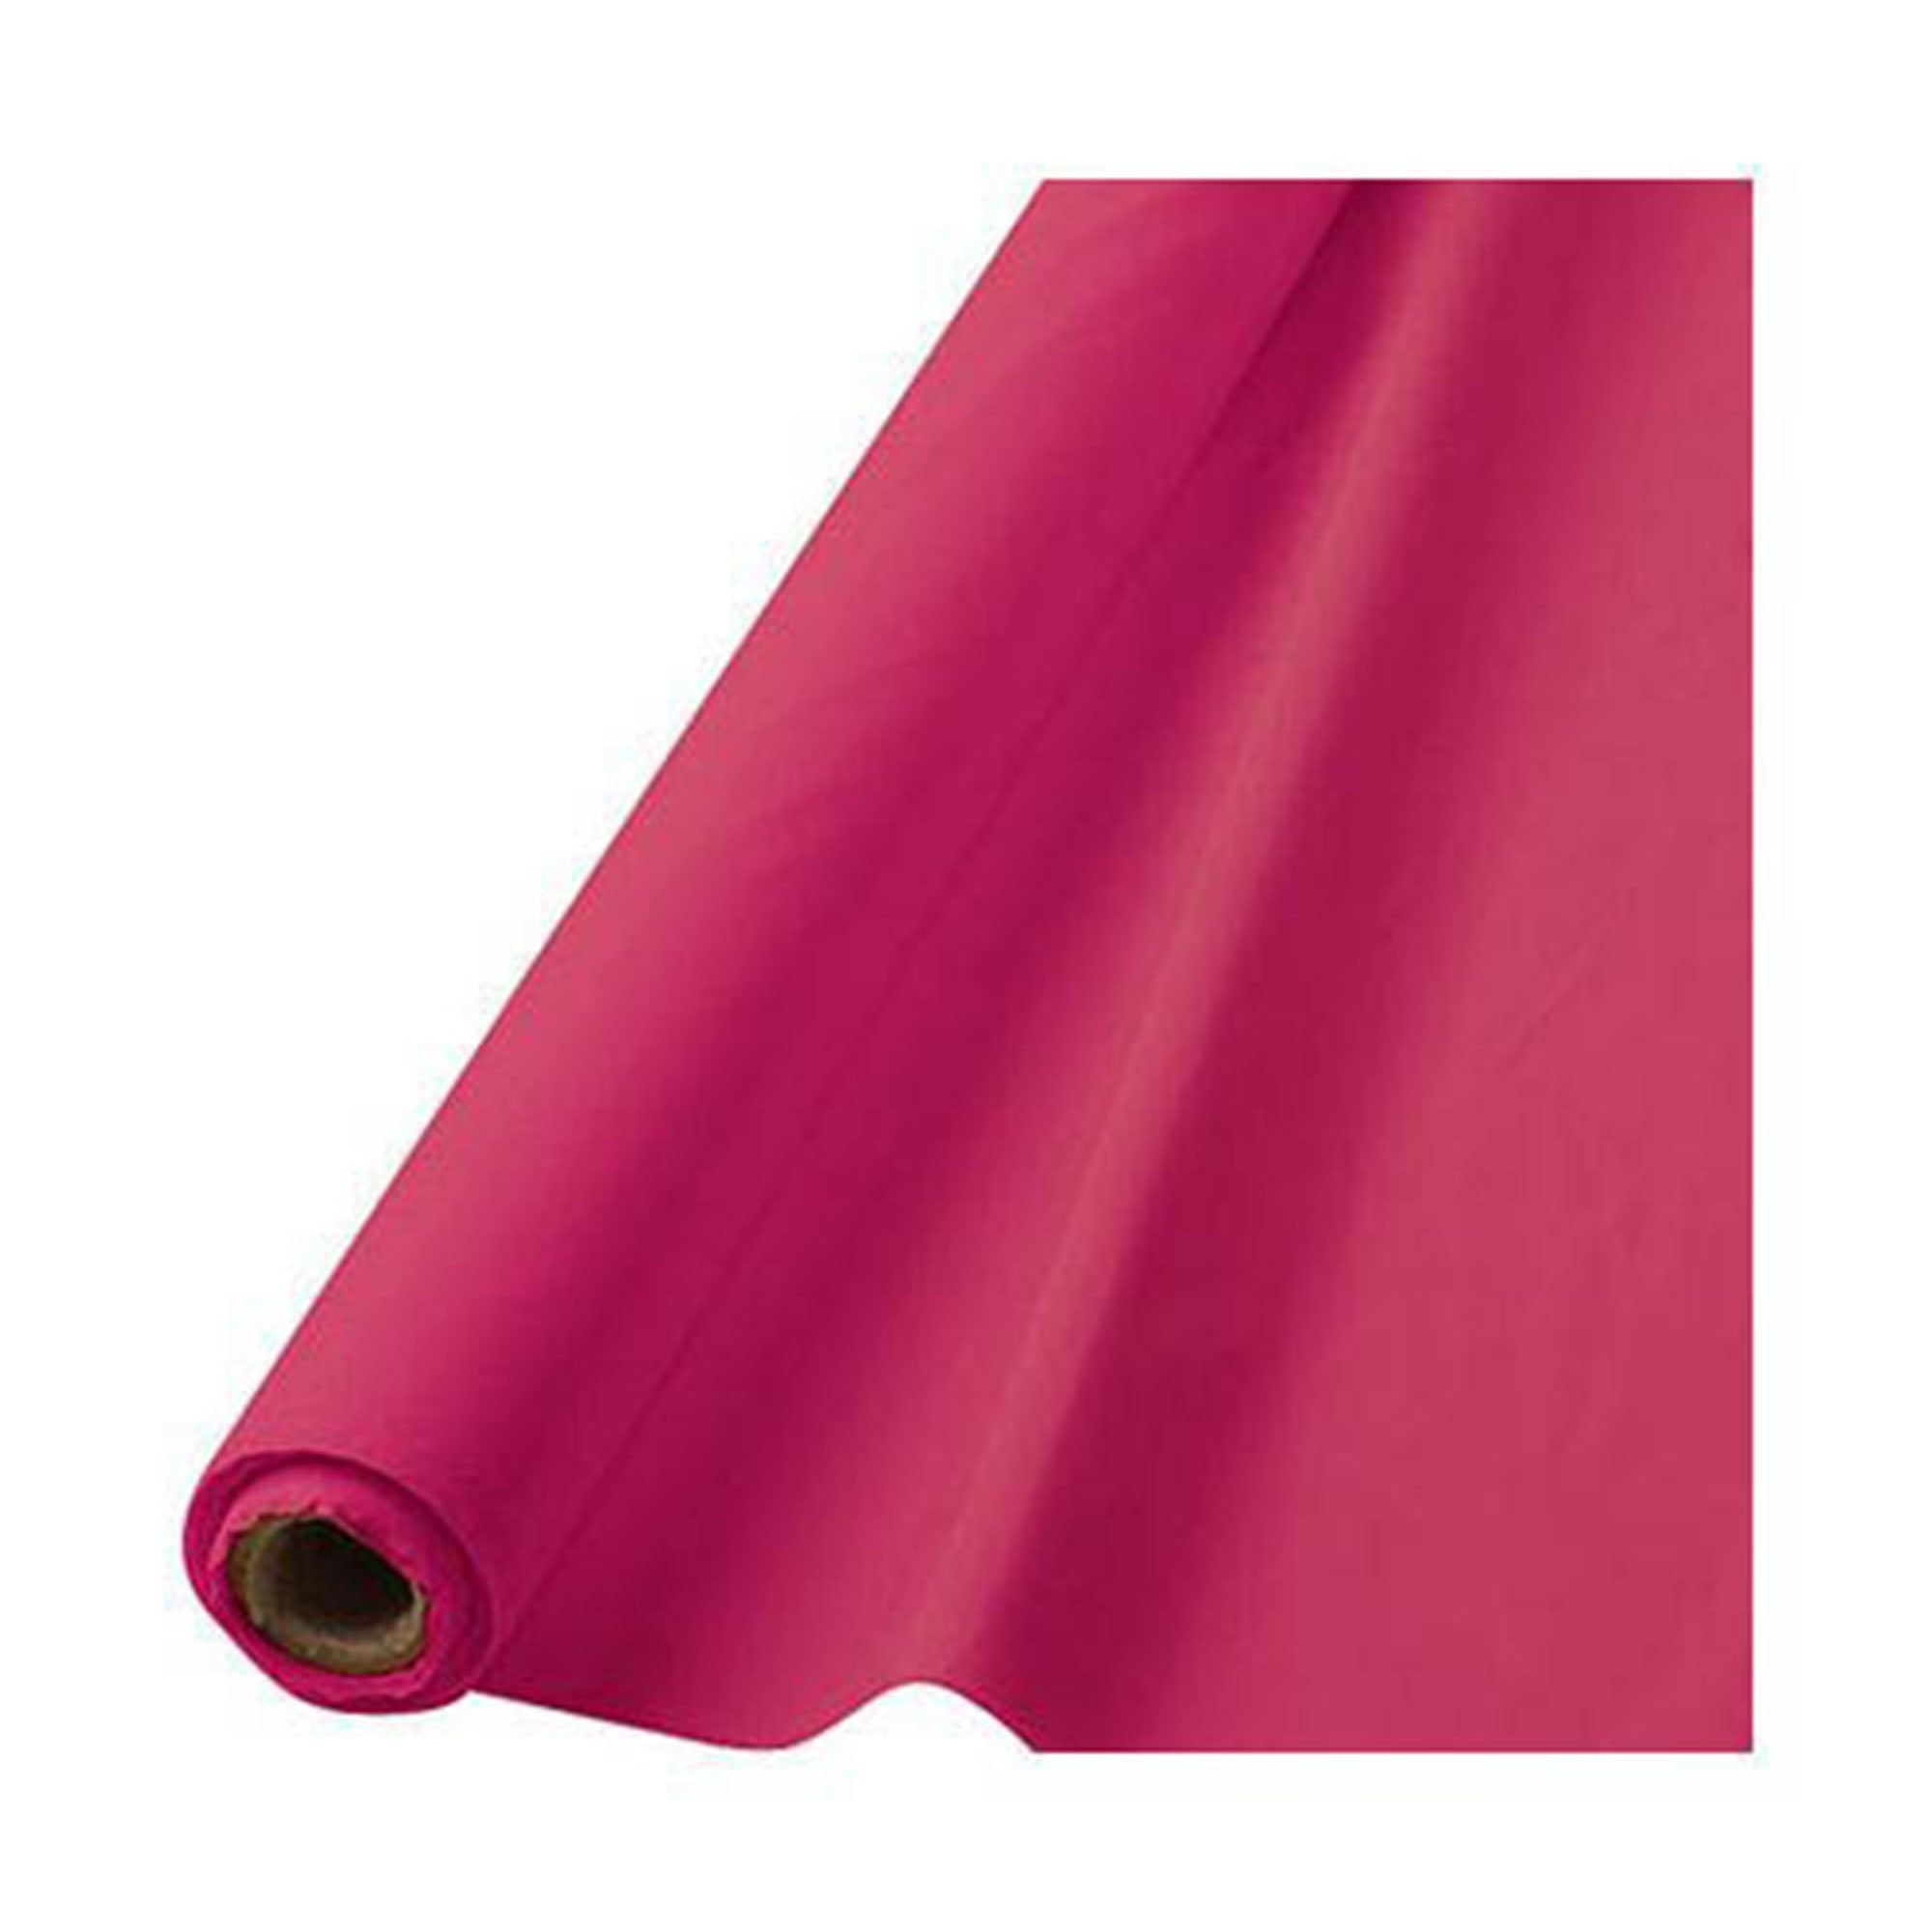 Plastic Table Roll  Bright Pink  40inx100ft